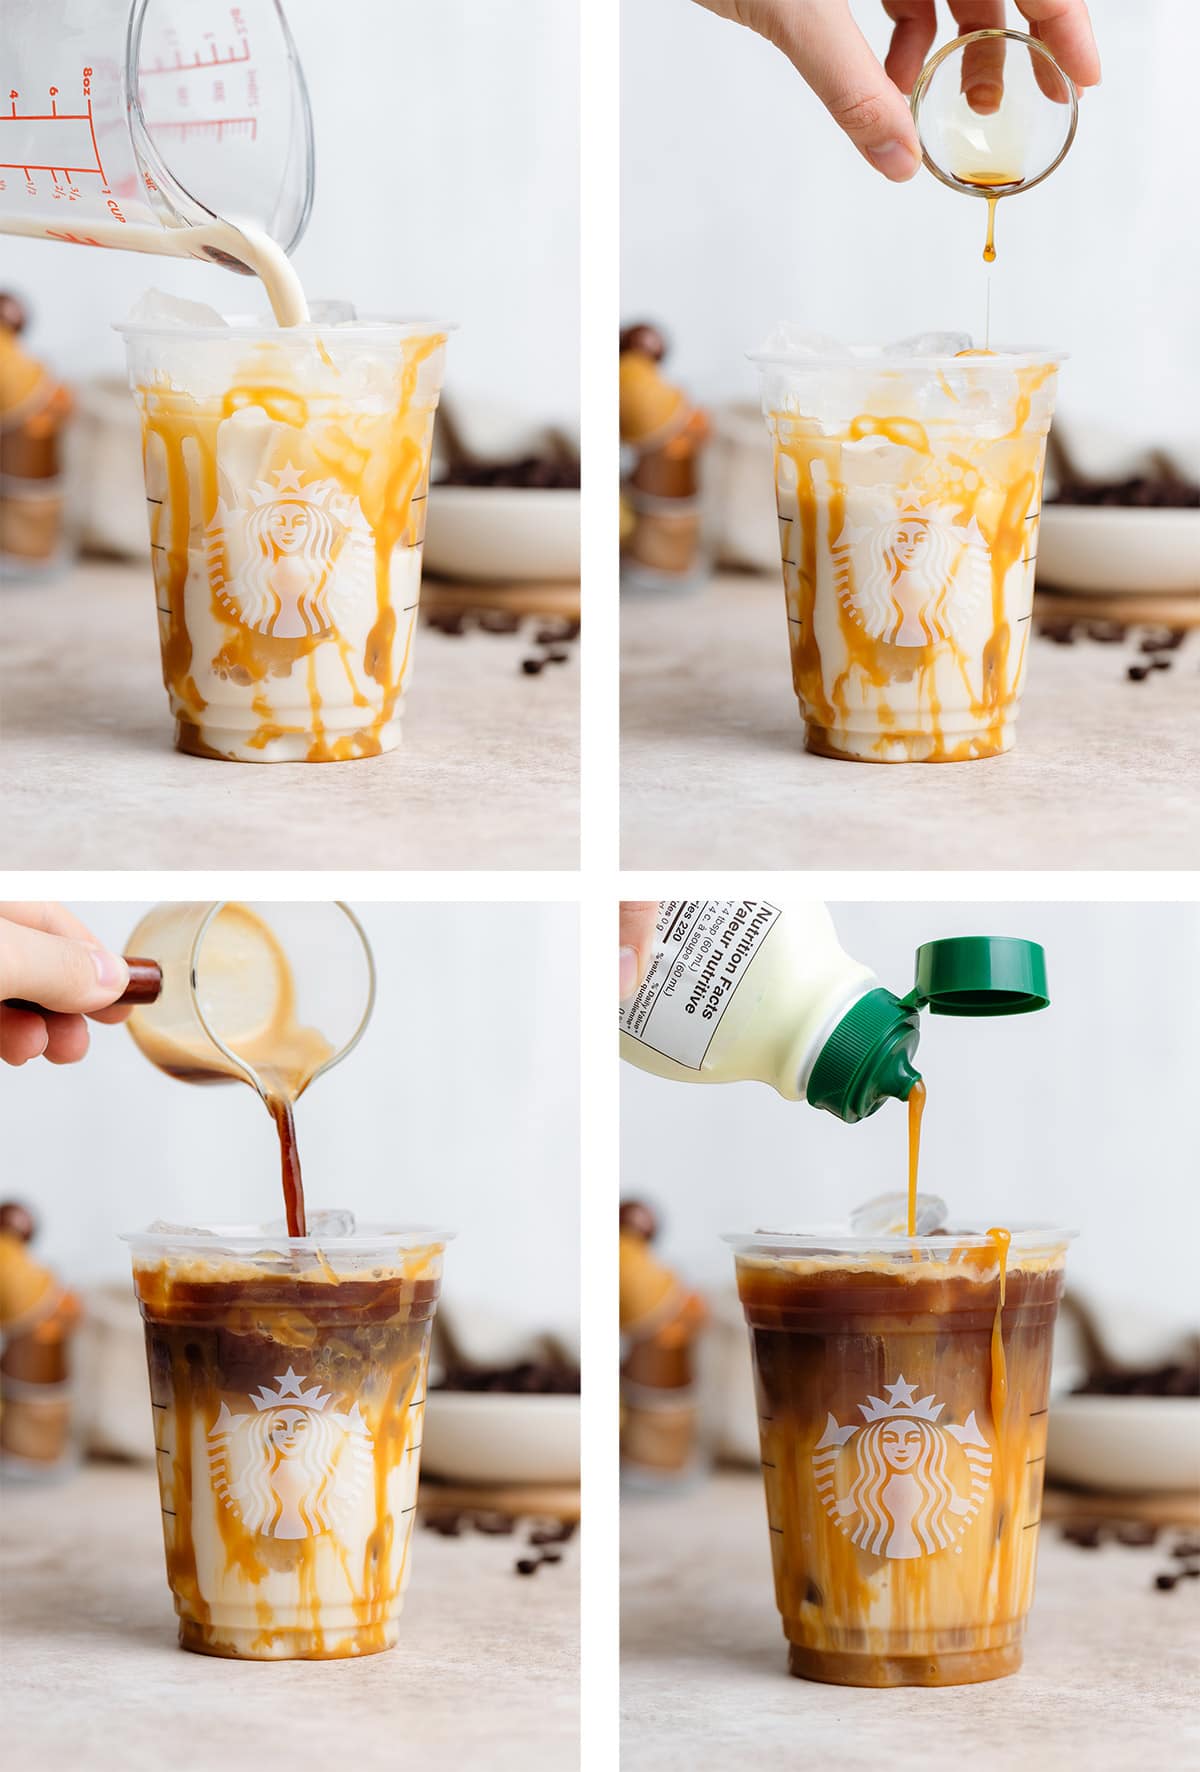 A hand pouring oat milk, vanilla, espresso, and caramel into a Starbucks cup to make an iced caramel macchiato.